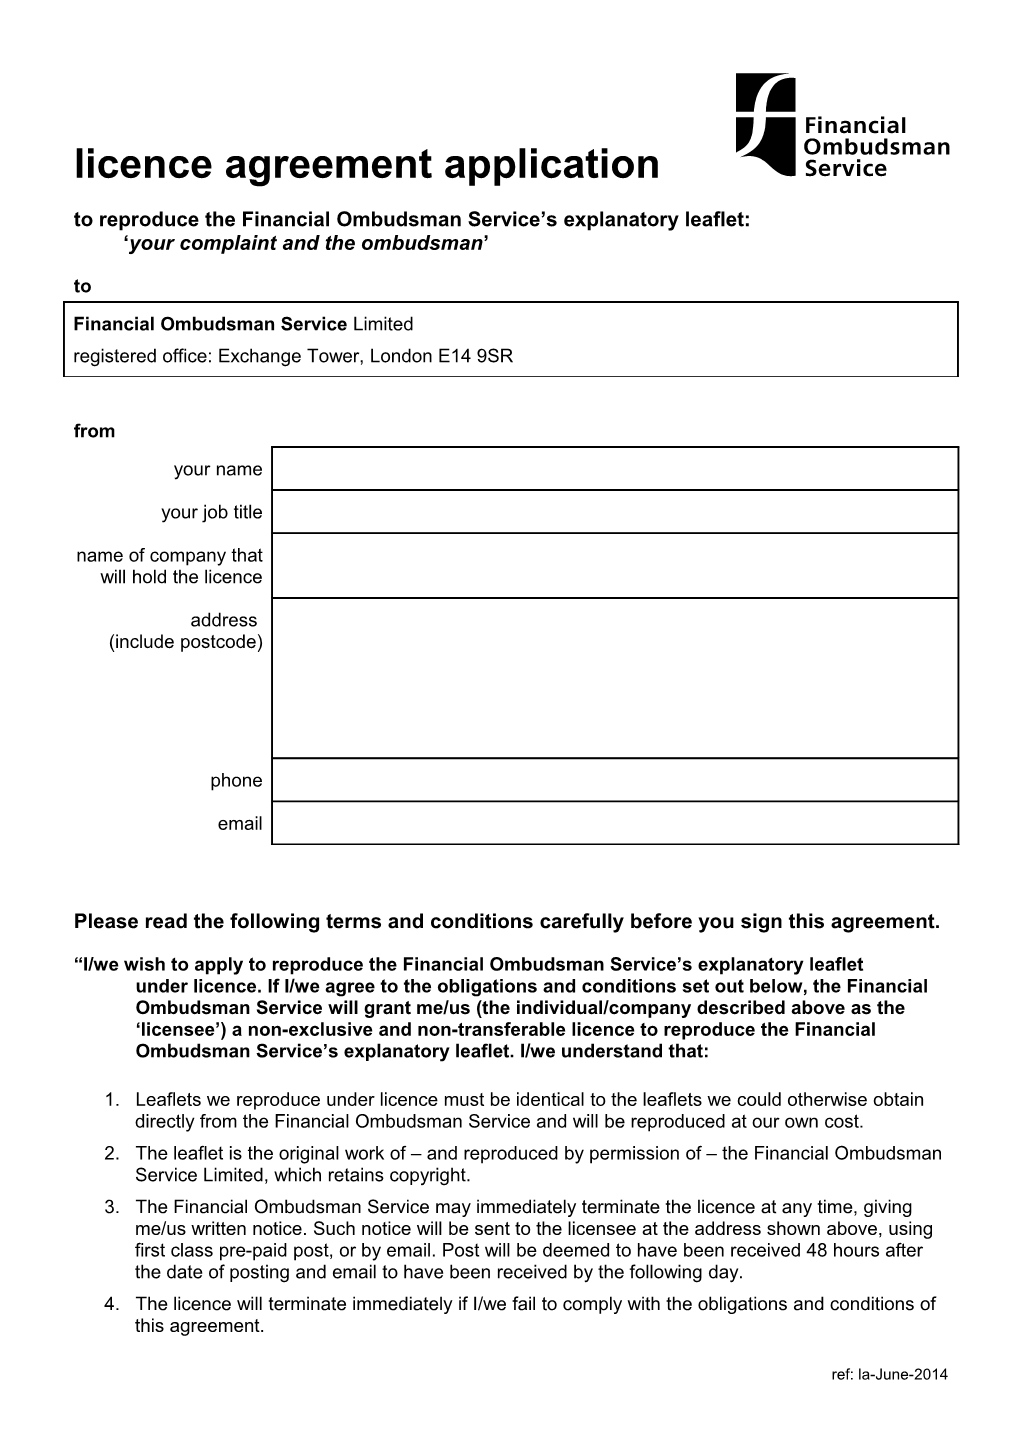 Licence Agreement Application